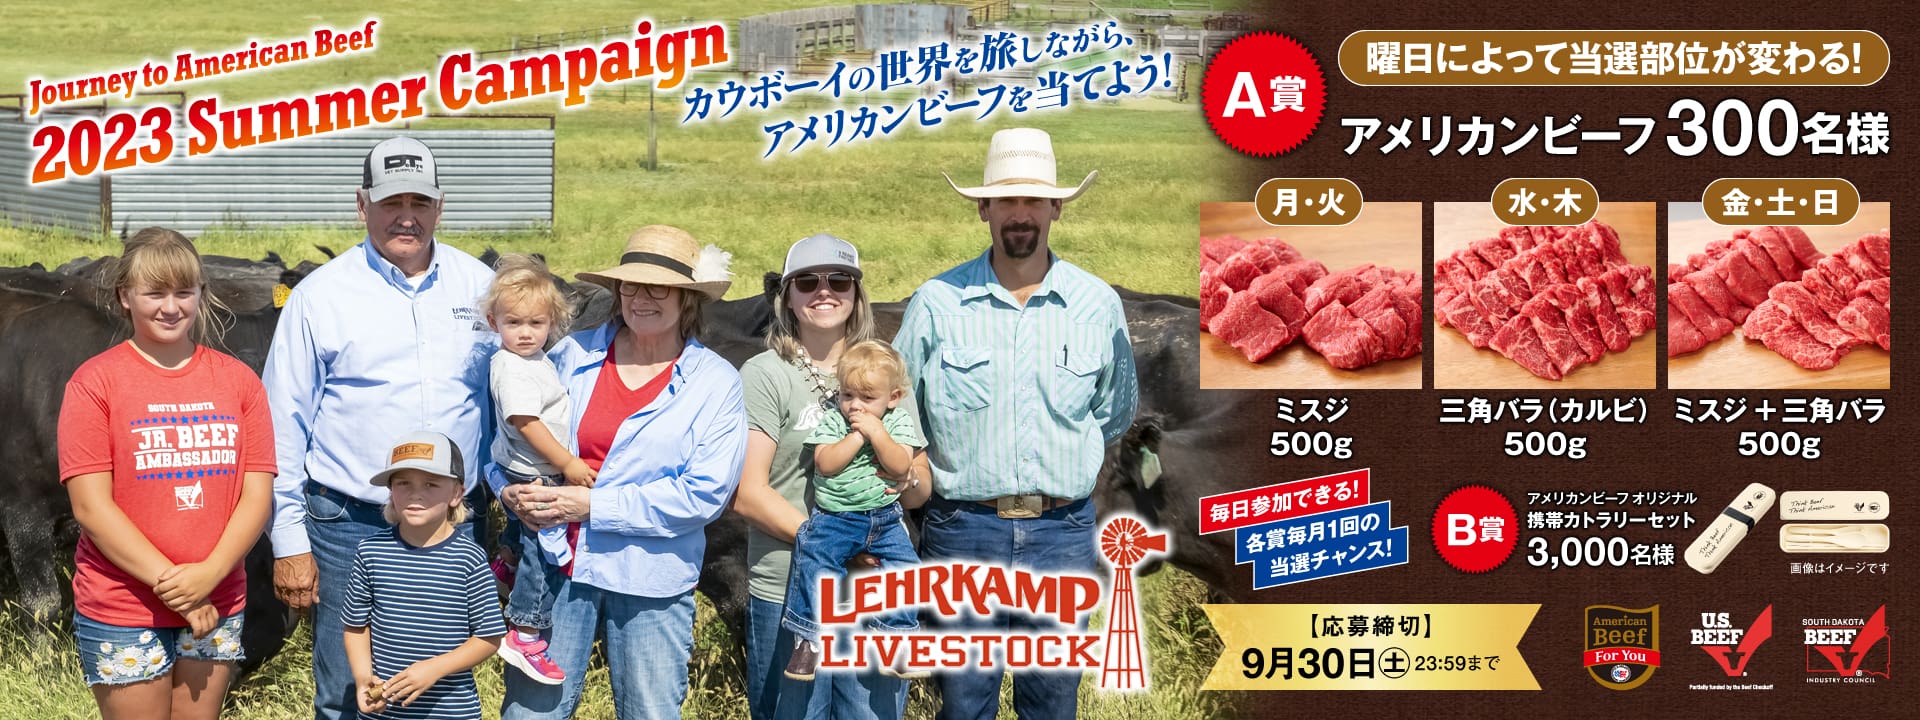 Journey to American Beef 2023 SUmmer Campaign カウボーイの世界を旅しながら、抽選に参加しよう！ 7月3日(月)よりスタート